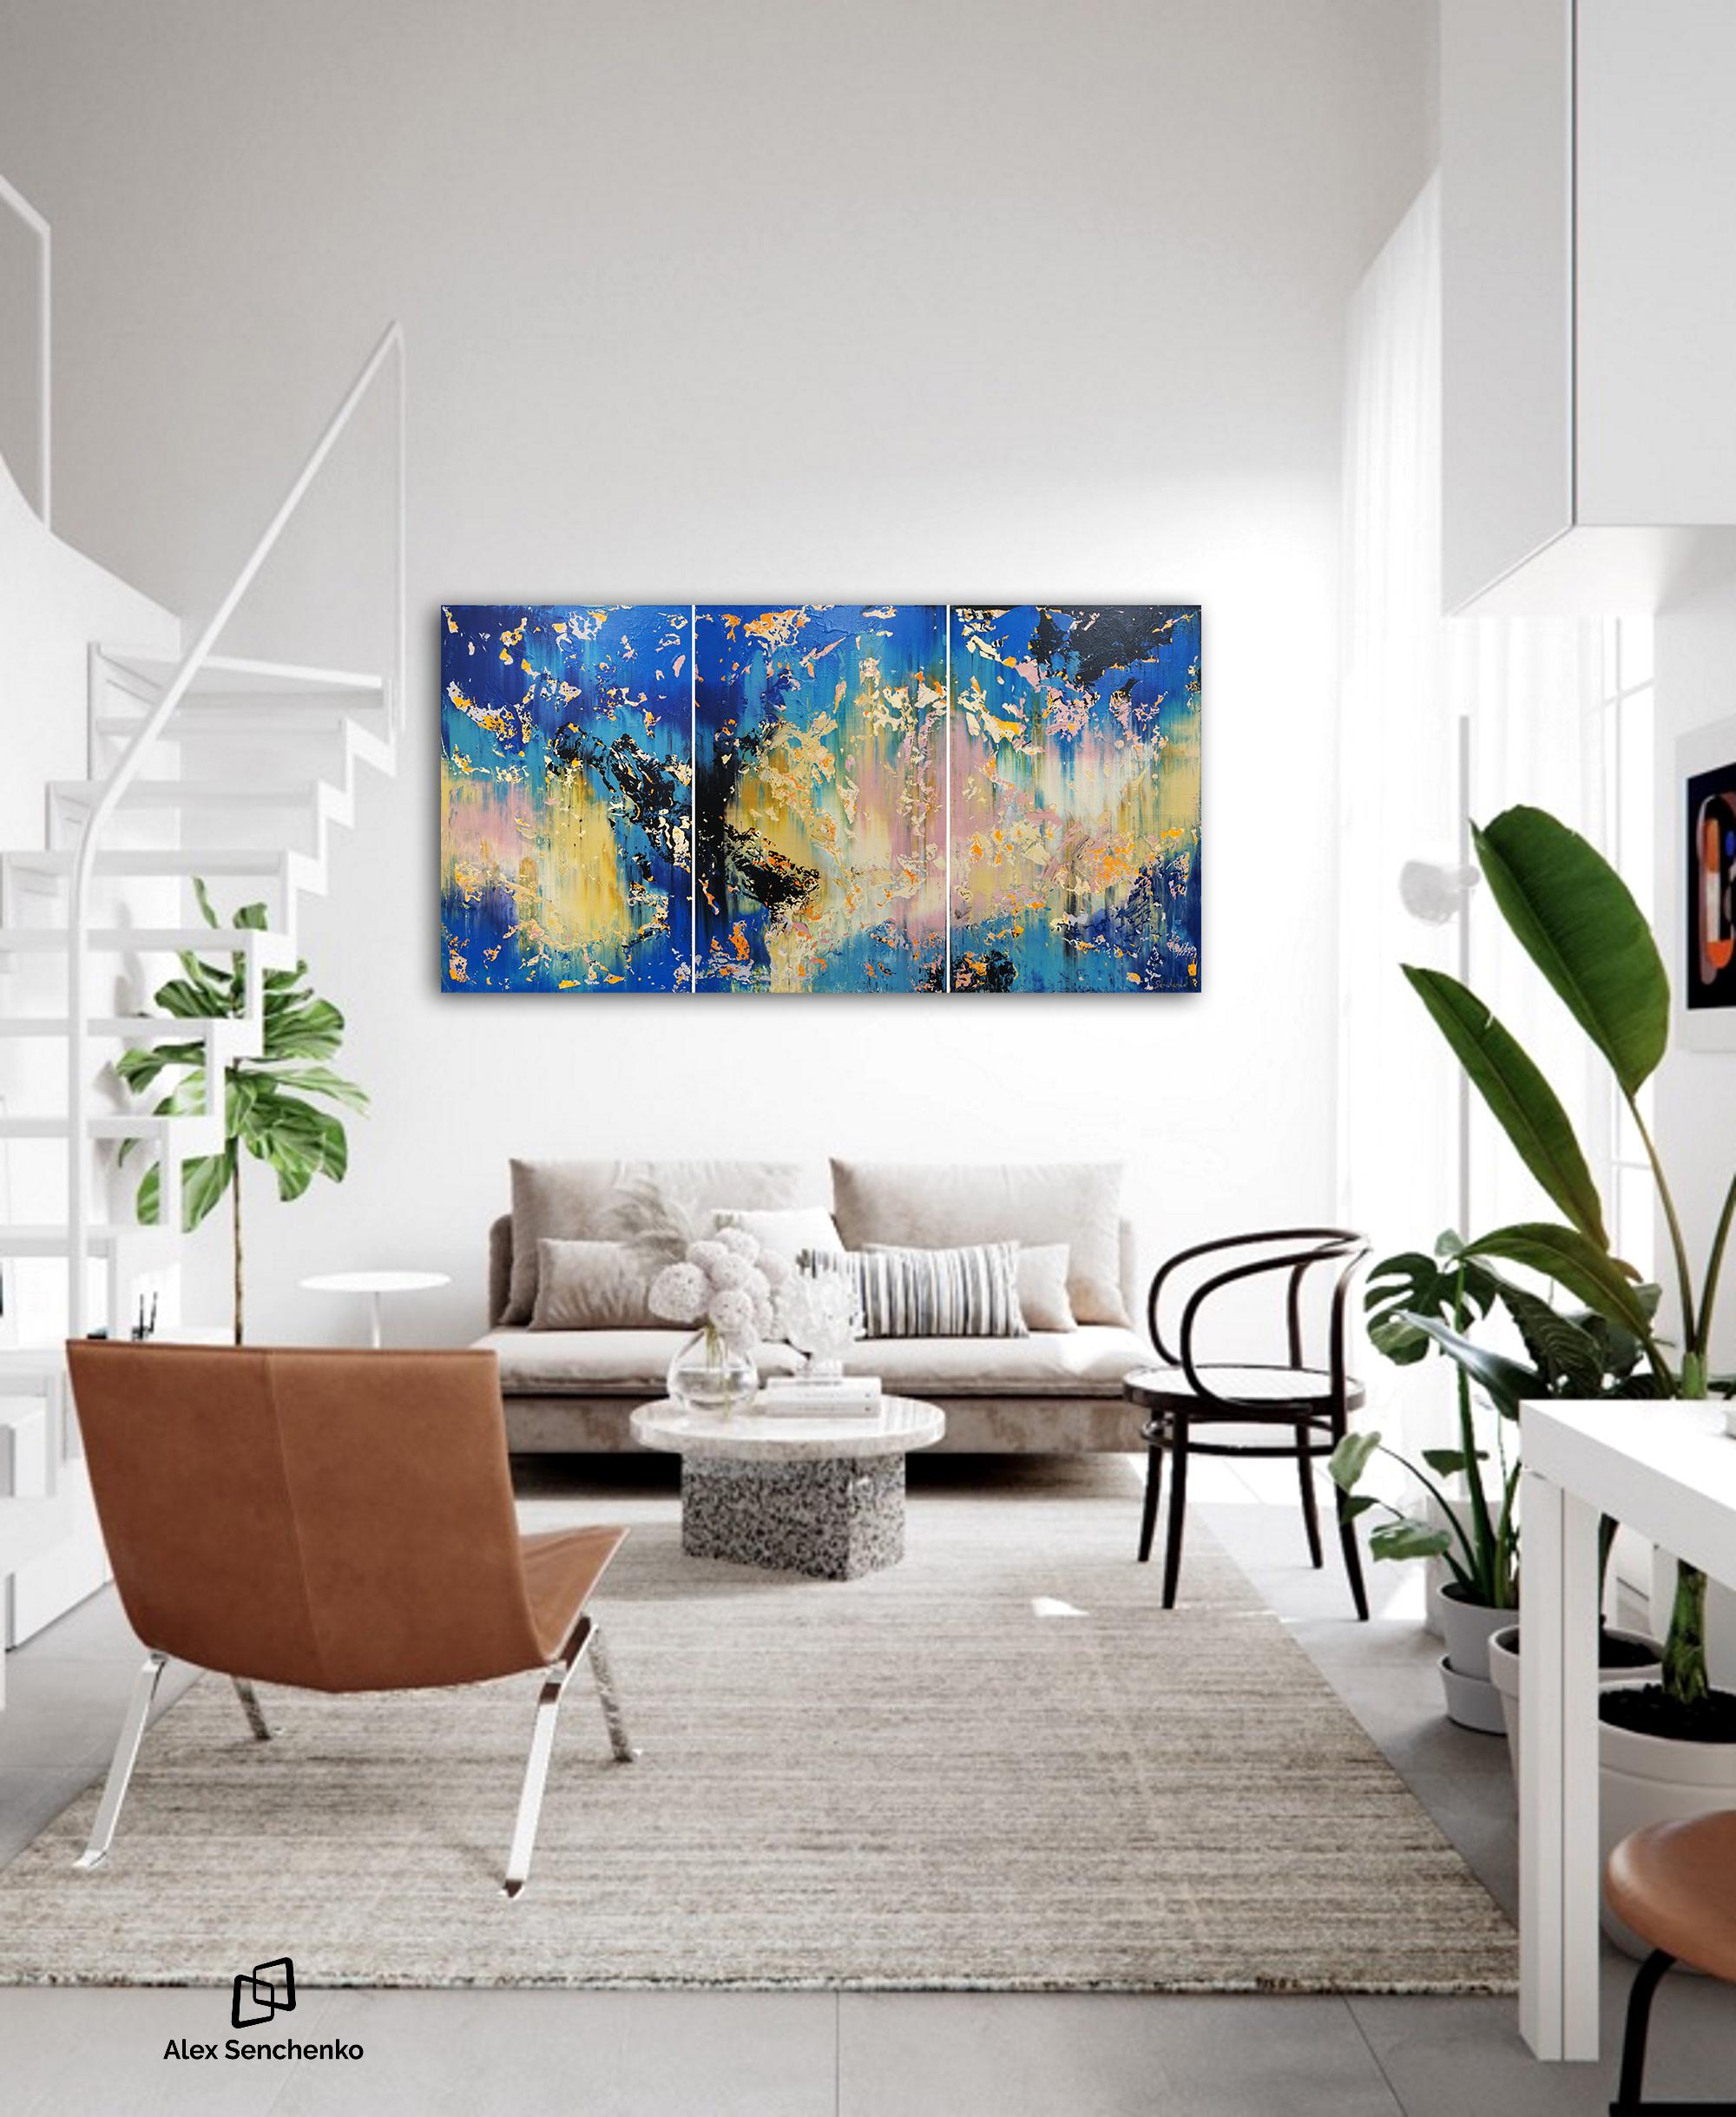 There’s something ethereal, almost magical, about contemporary paintings. The
incredible Expressionism bleeds through the canvas, transforming any room into an
entirely new experience. Alex Senchenko’s ,, Abstract 2173 ,, painting will give your